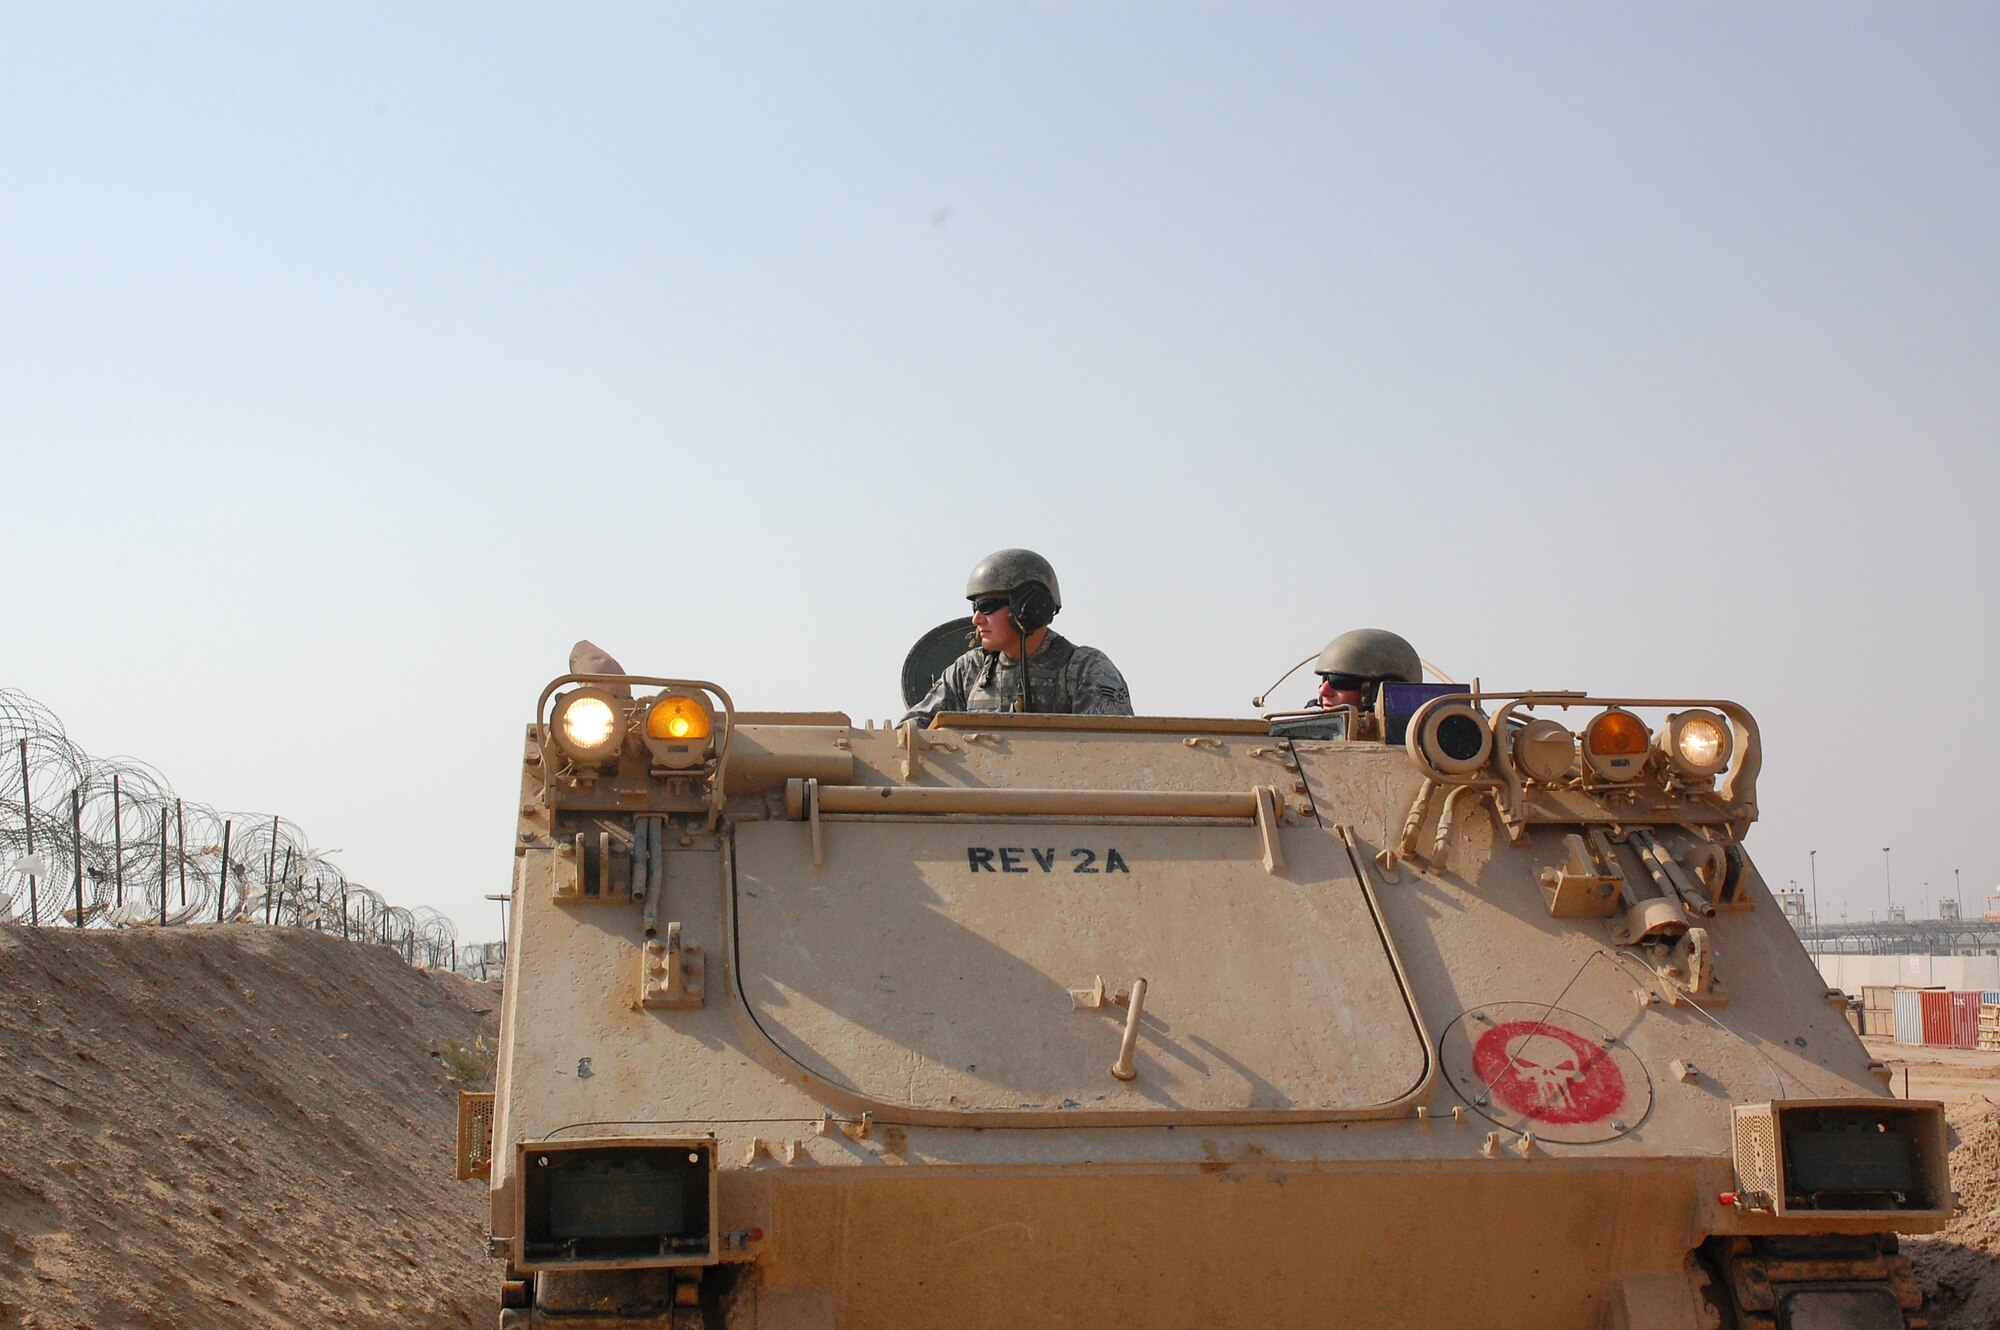 CAMP BUCCA, Iraq – Senior Airman Travis Hummel, left, and Airman 1st Class Adam Giebitz patrol in an M-113 Armored Personnel Carrier at the Theater Internment Facility in Camp Bucca, Iraq, Feb. 10, 2008. Airmen Hummel and Giebitz are deployed from Robins Air Force Base, Ga., and are assigned to the 886th Expeditionary Security Forces Squadron’s quick response force.  The QRF responds to issues within the TIF in which a show of force or escalation of force is required beyond the capabilities for the TIF’s guard force.  (U.S. Air Force Photo/Capt. Jason McCree)